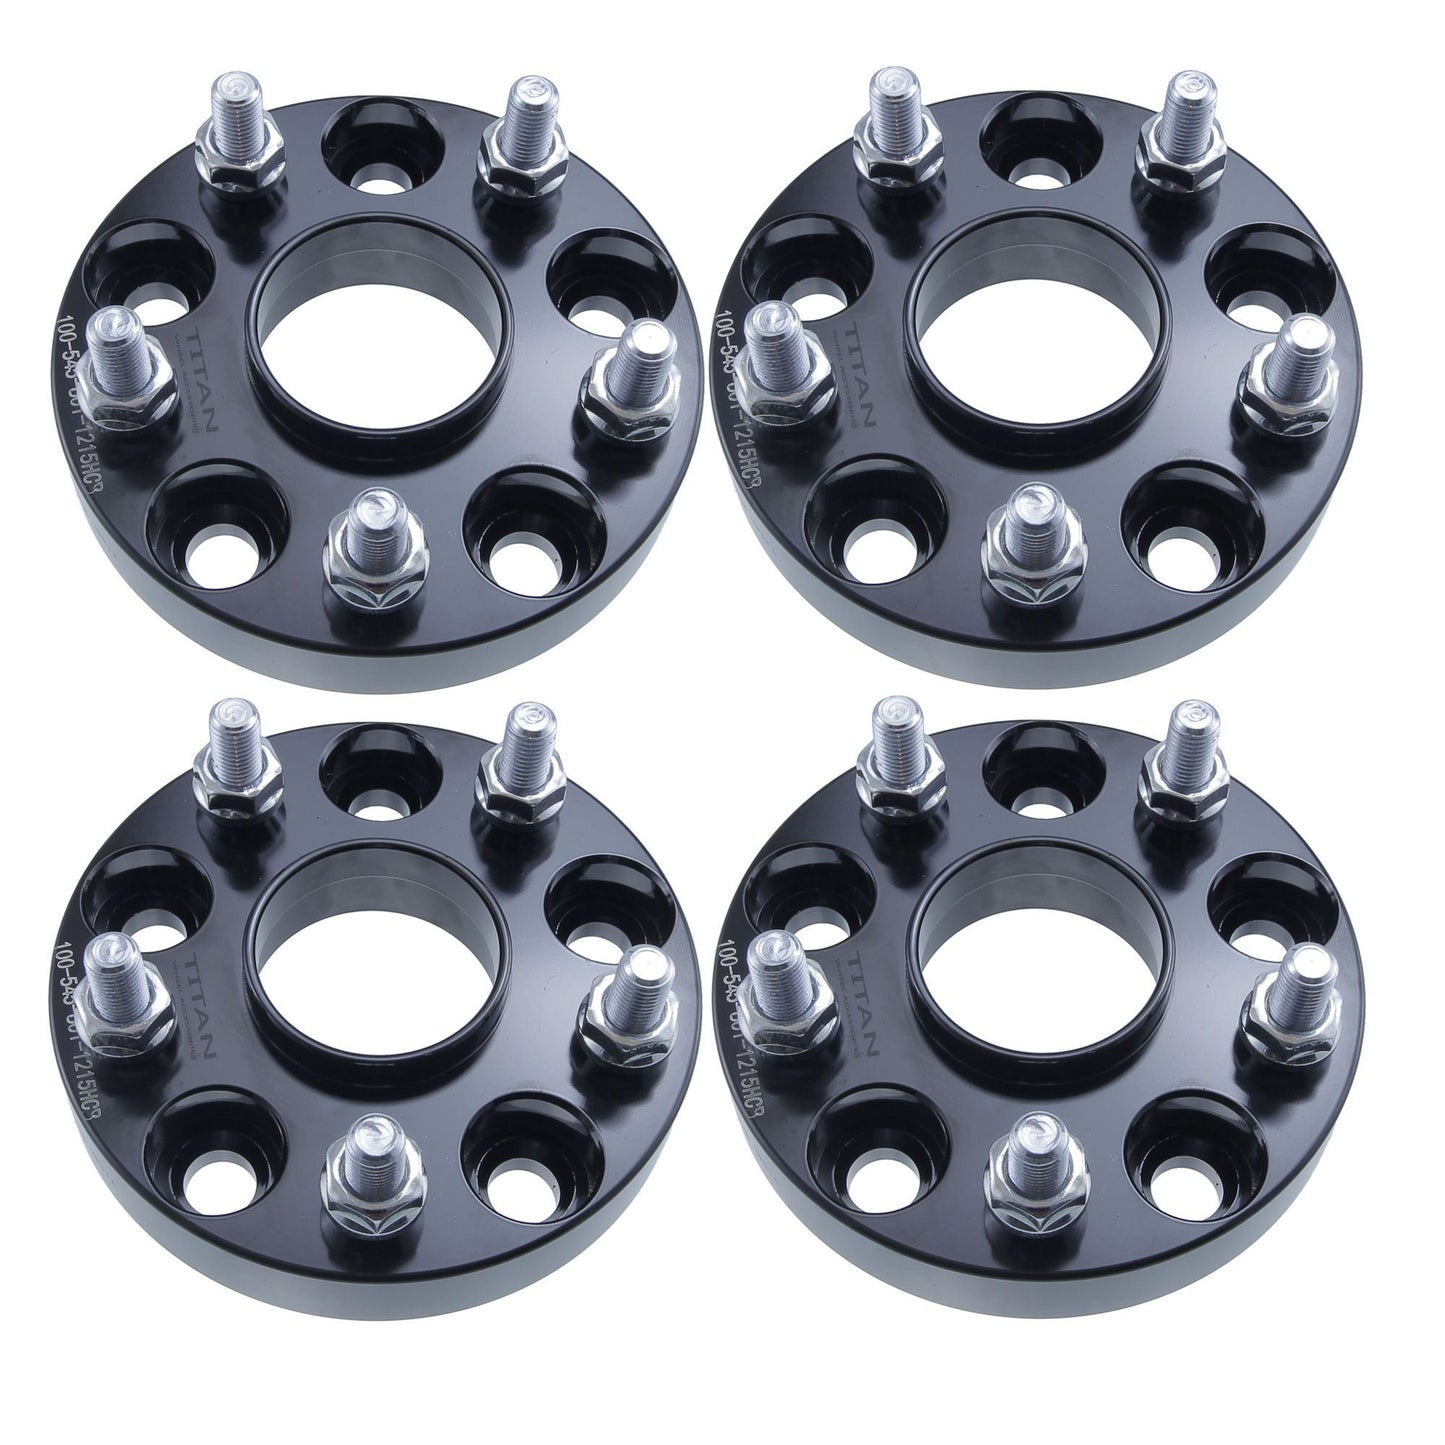 25mm (1") Titan Wheel Spacers for Toyota Camry MR2 Supra Lexus IS | 5x114.3 | 60.1 Hubcentric |12x1.5 Studs |  Set of 4 | Titan Wheel Accessories